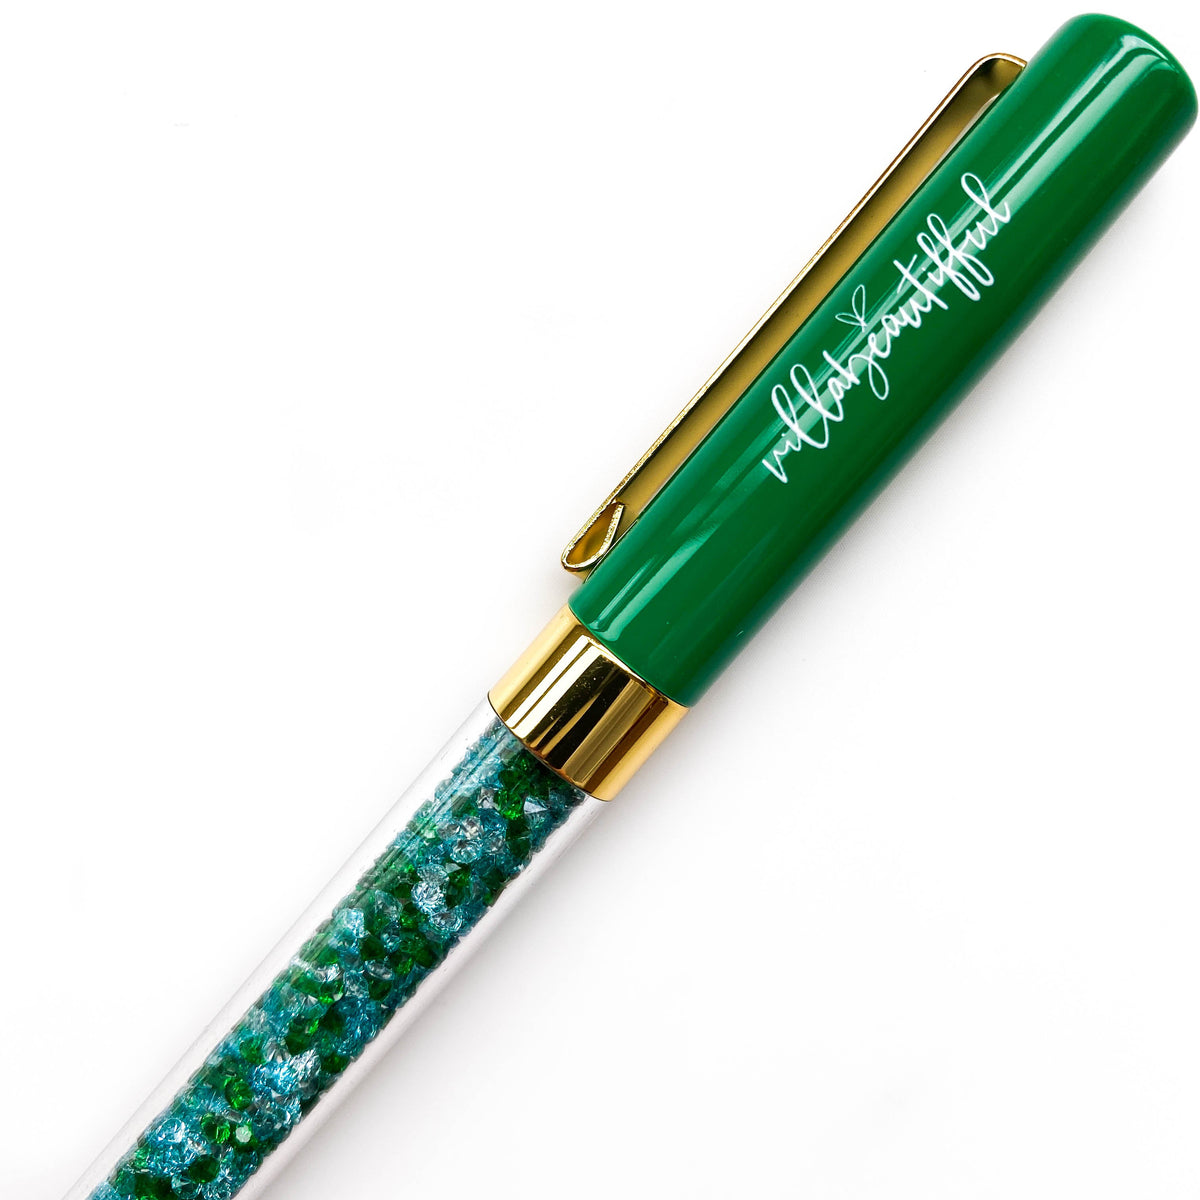 Irish You Luck Imperfect Crystal VBPen | limited pen